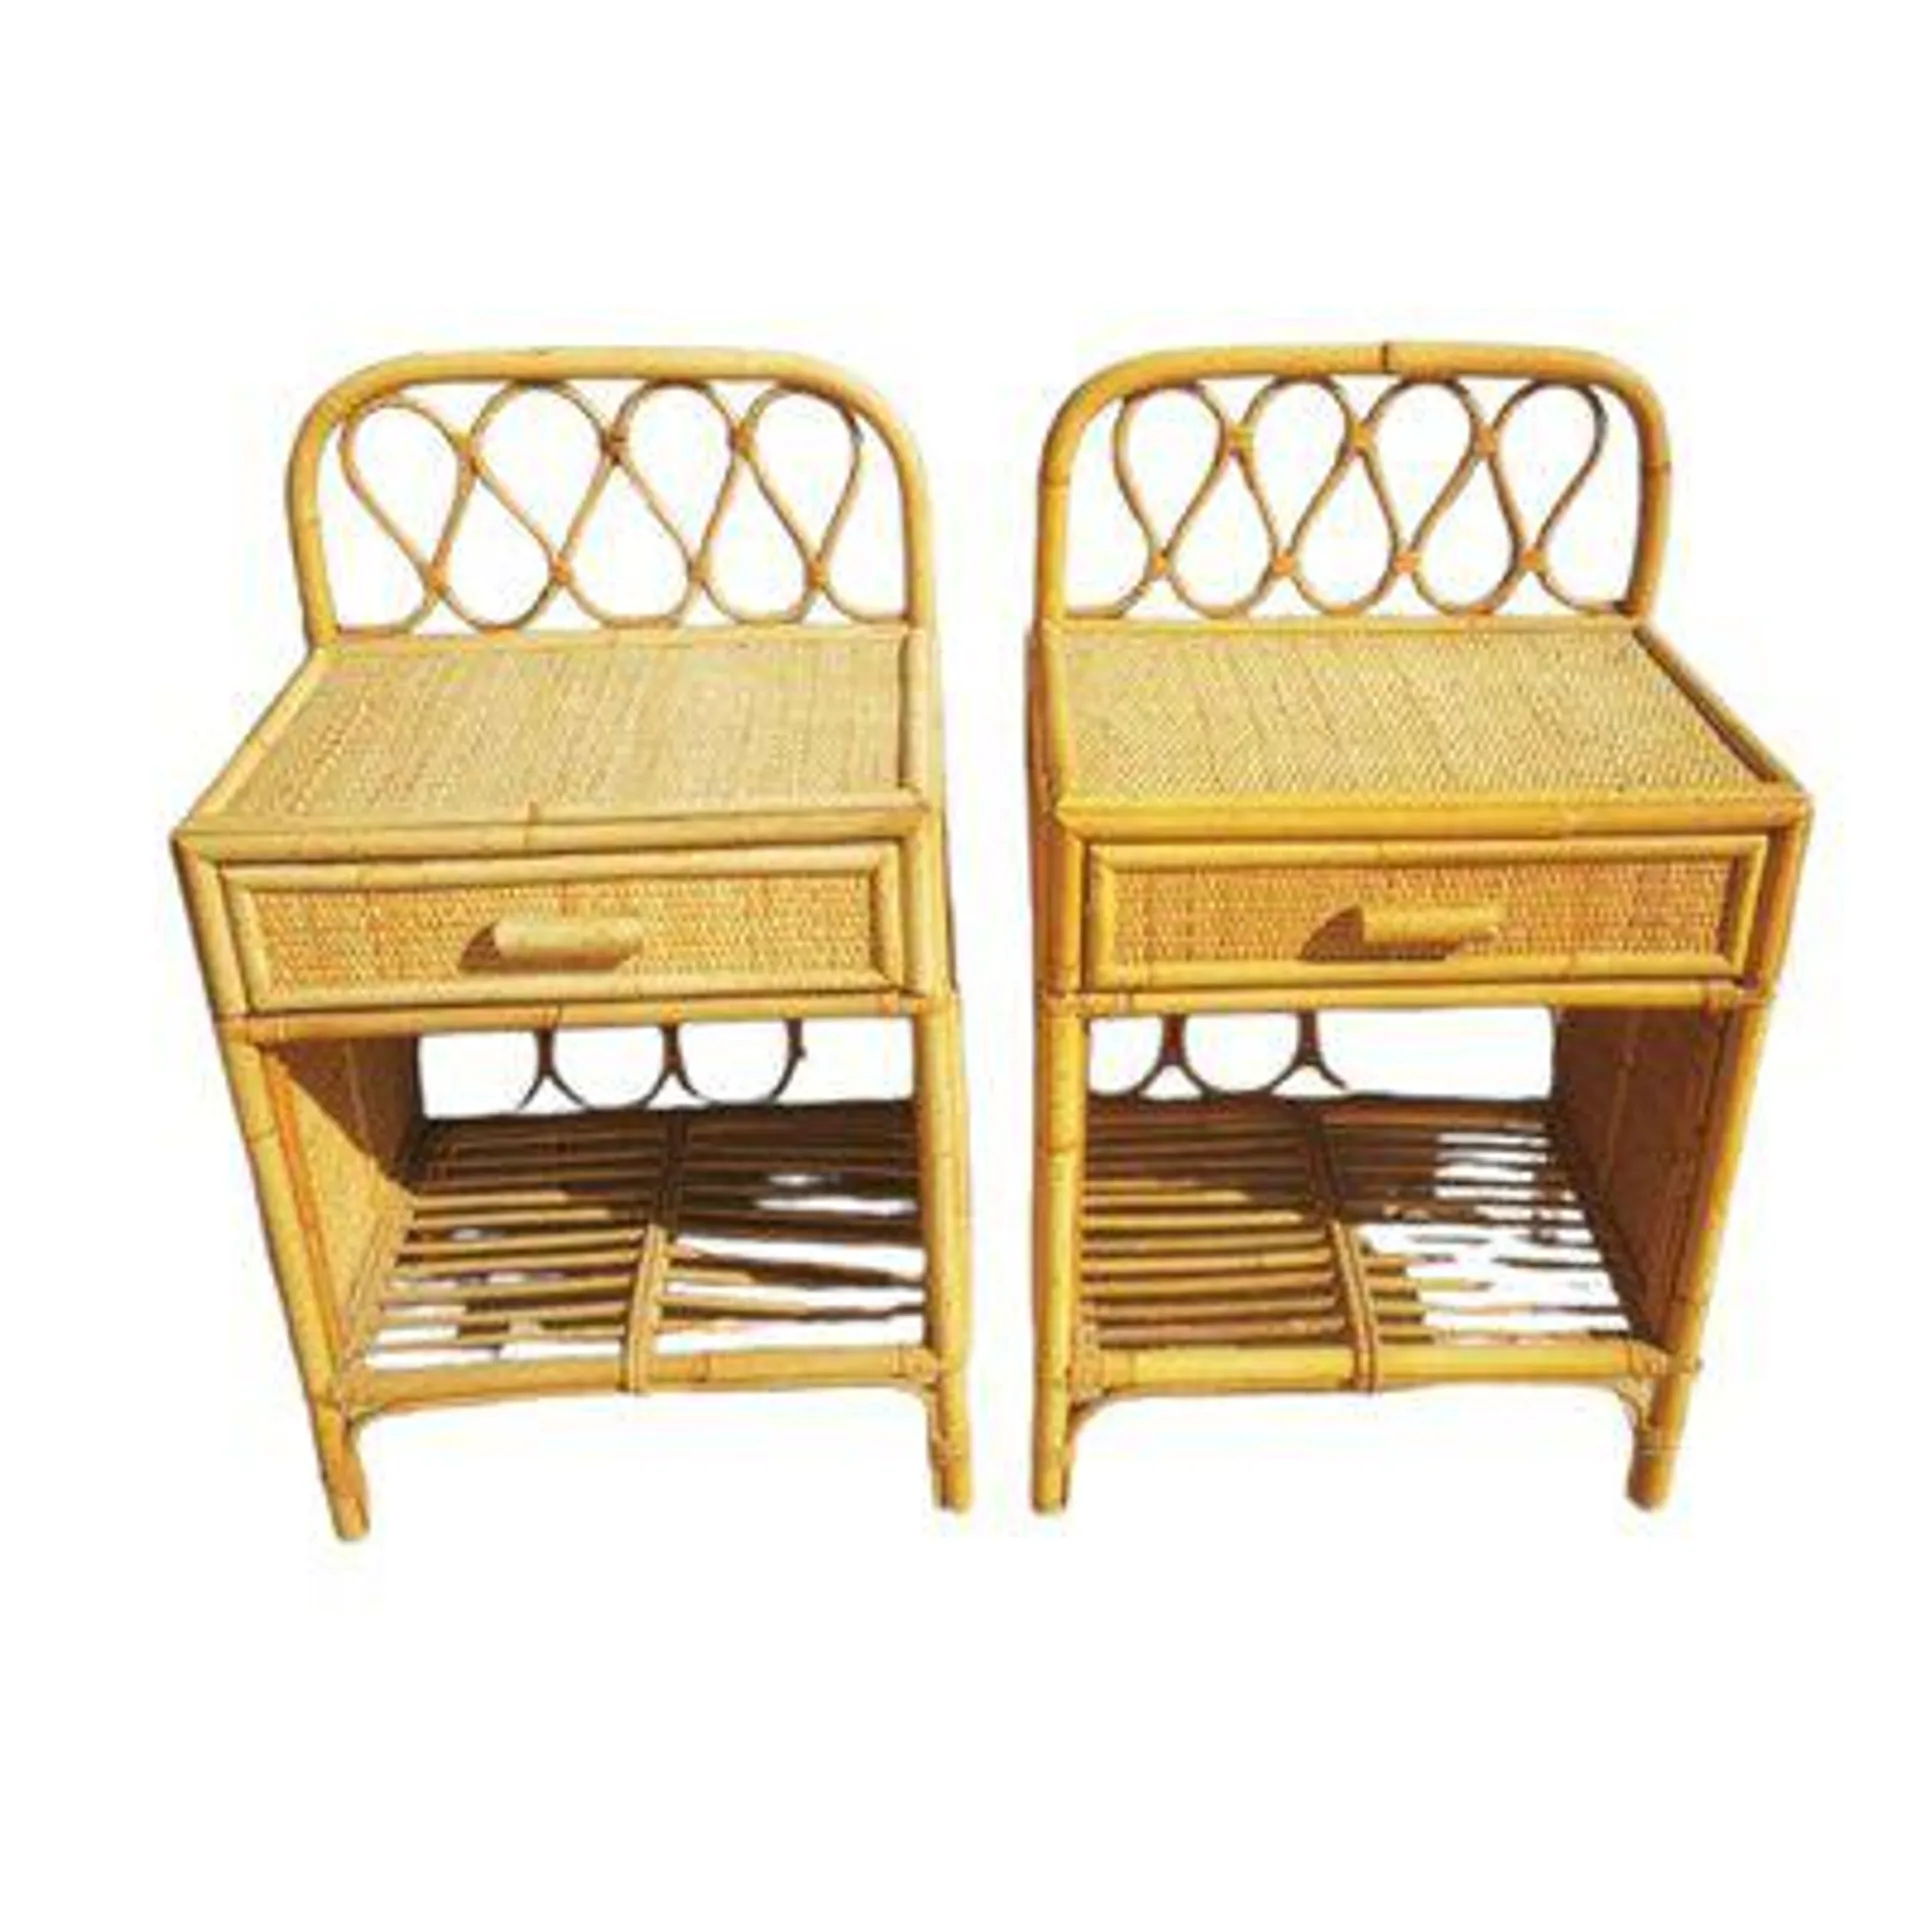 Vintage Spanish Bamboo and Wicker Tables, Set of 2